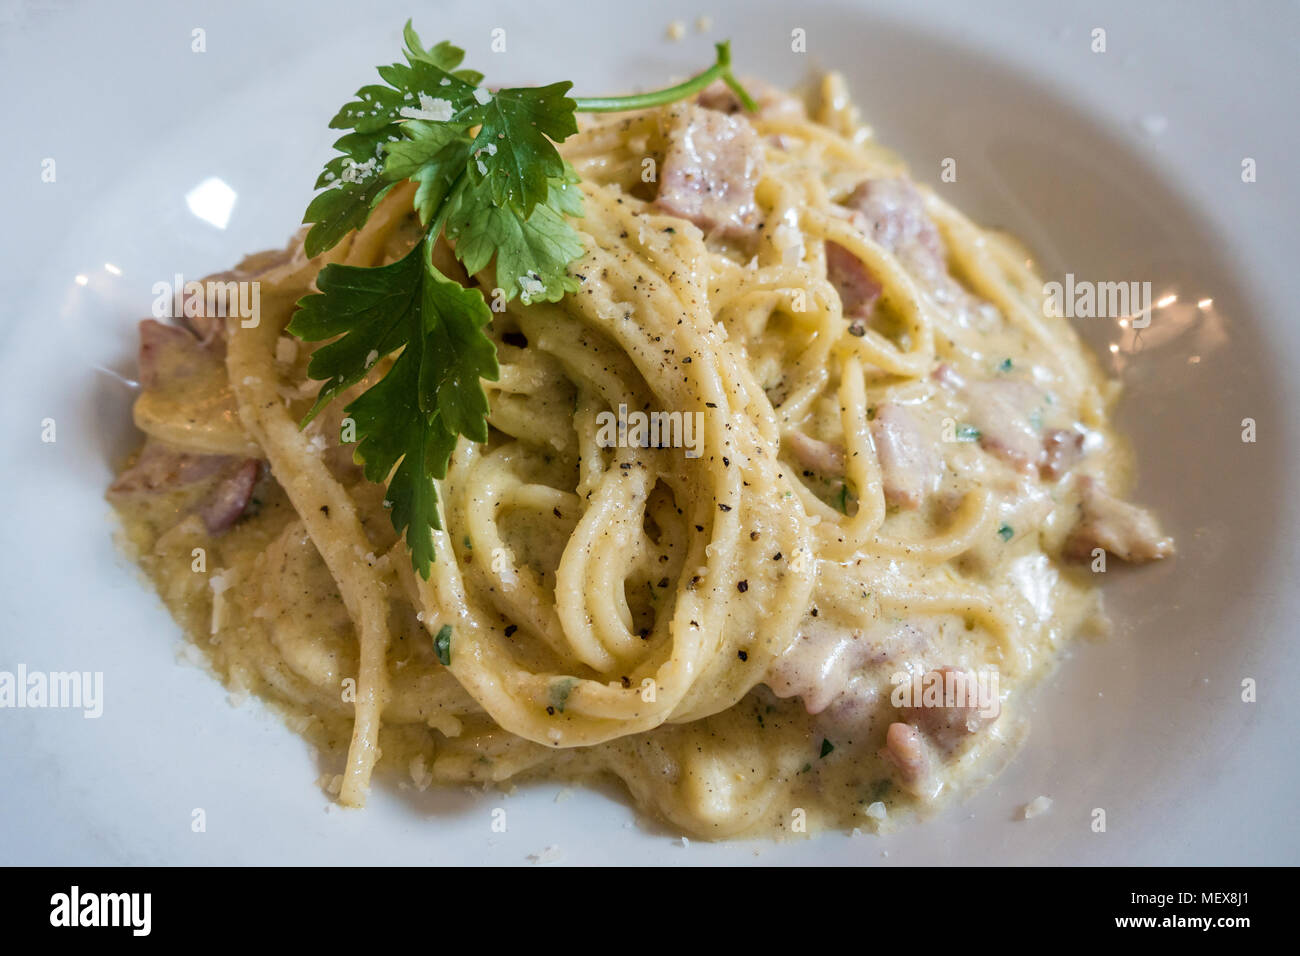 A close up view of a bowl of Spaghetti Carbonara garnished wiht a sprig of parsely. Stock Photo